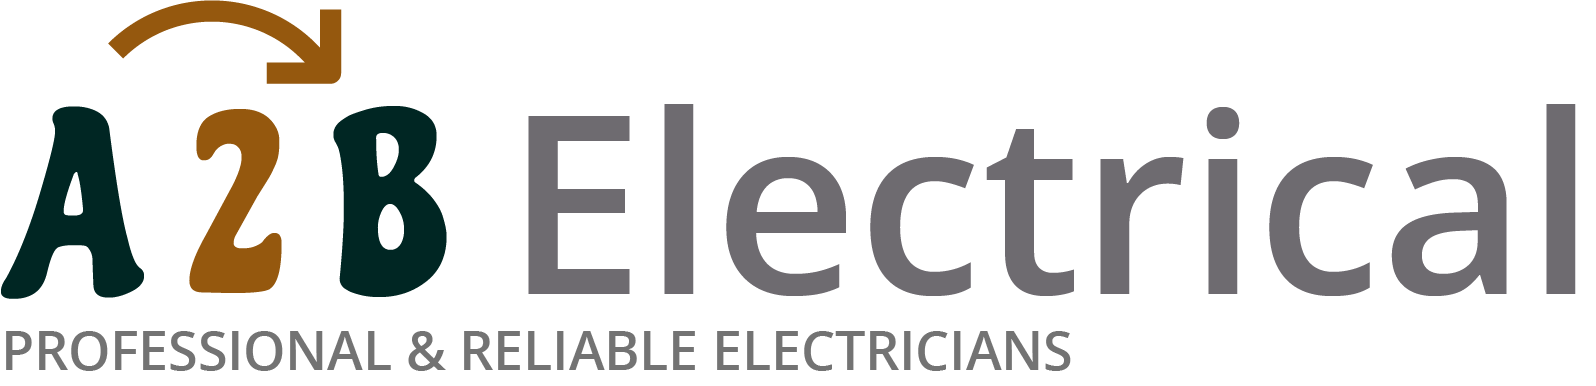 If you have electrical wiring problems in Fleetwood, we can provide an electrician to have a look for you. 